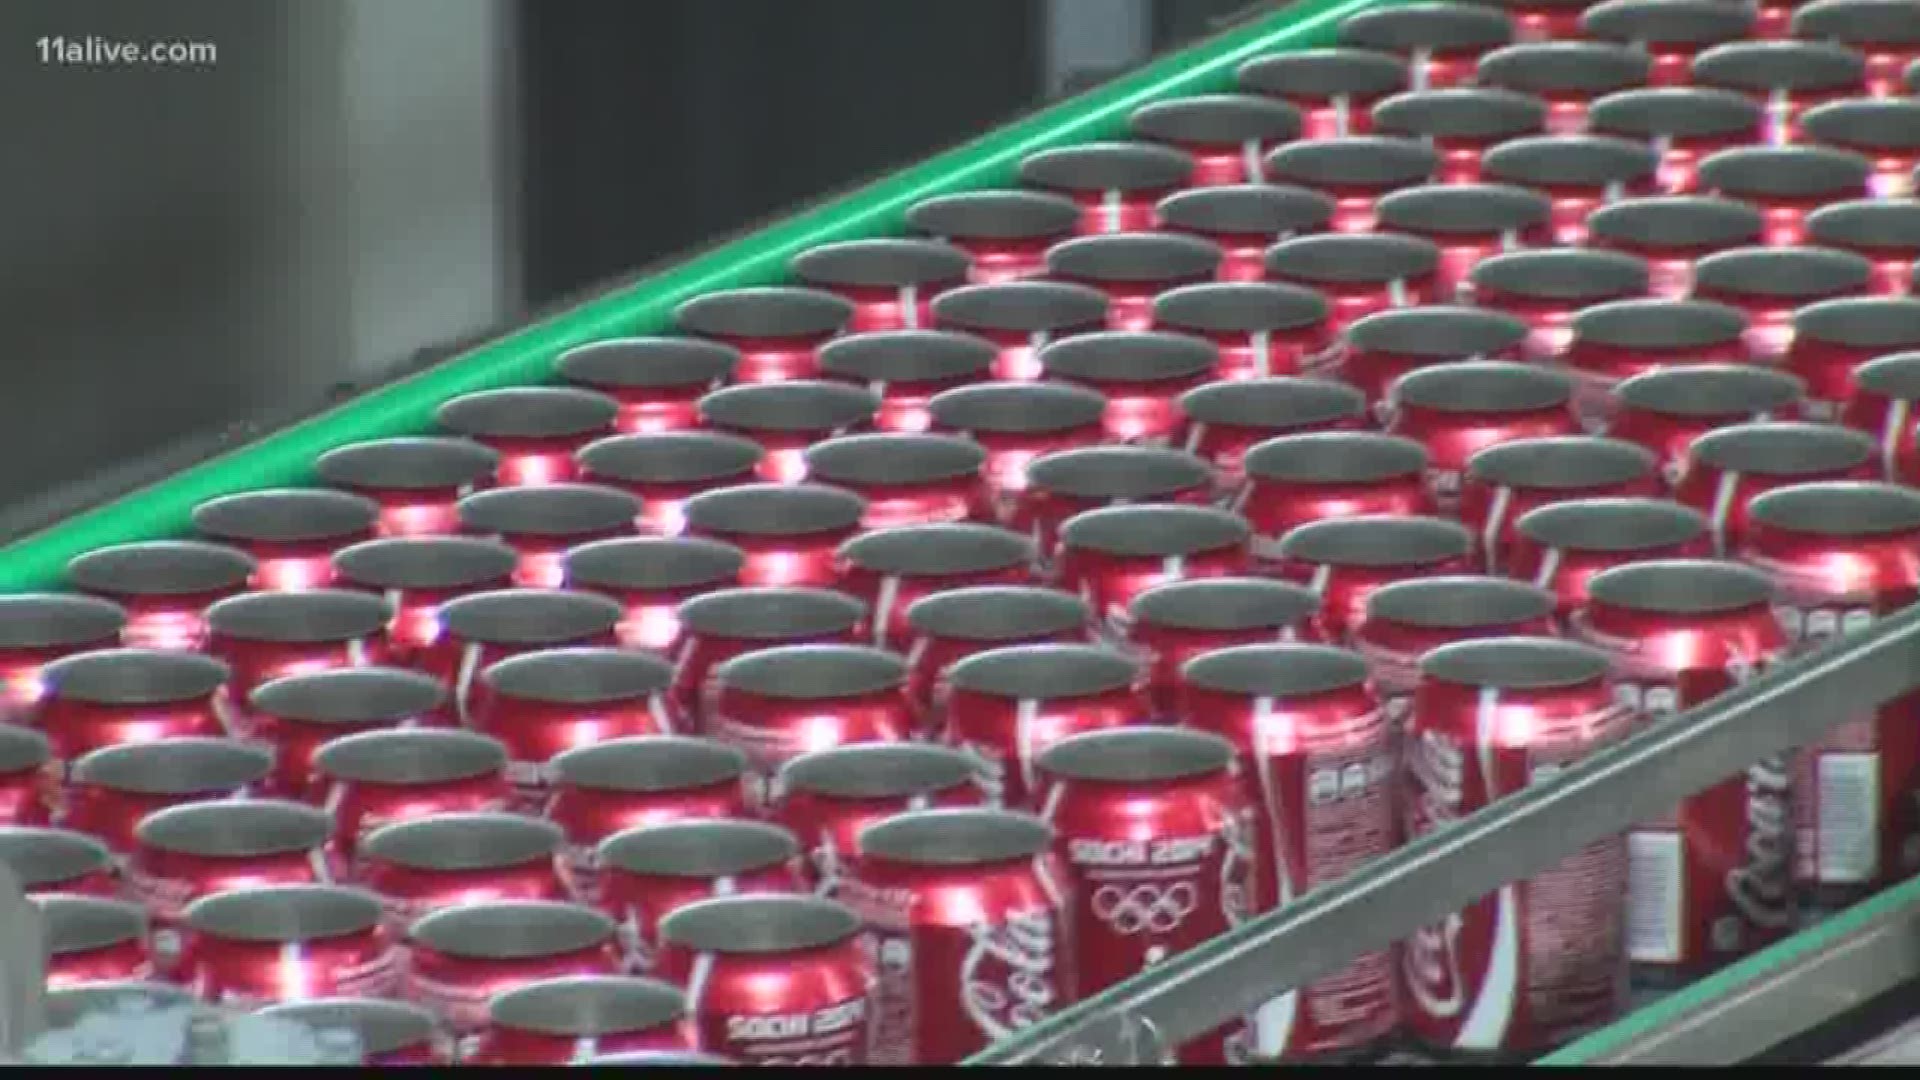 The Atlanta-based soft drink giant says suppliers in China have experienced delays in production and export of some ingredients.